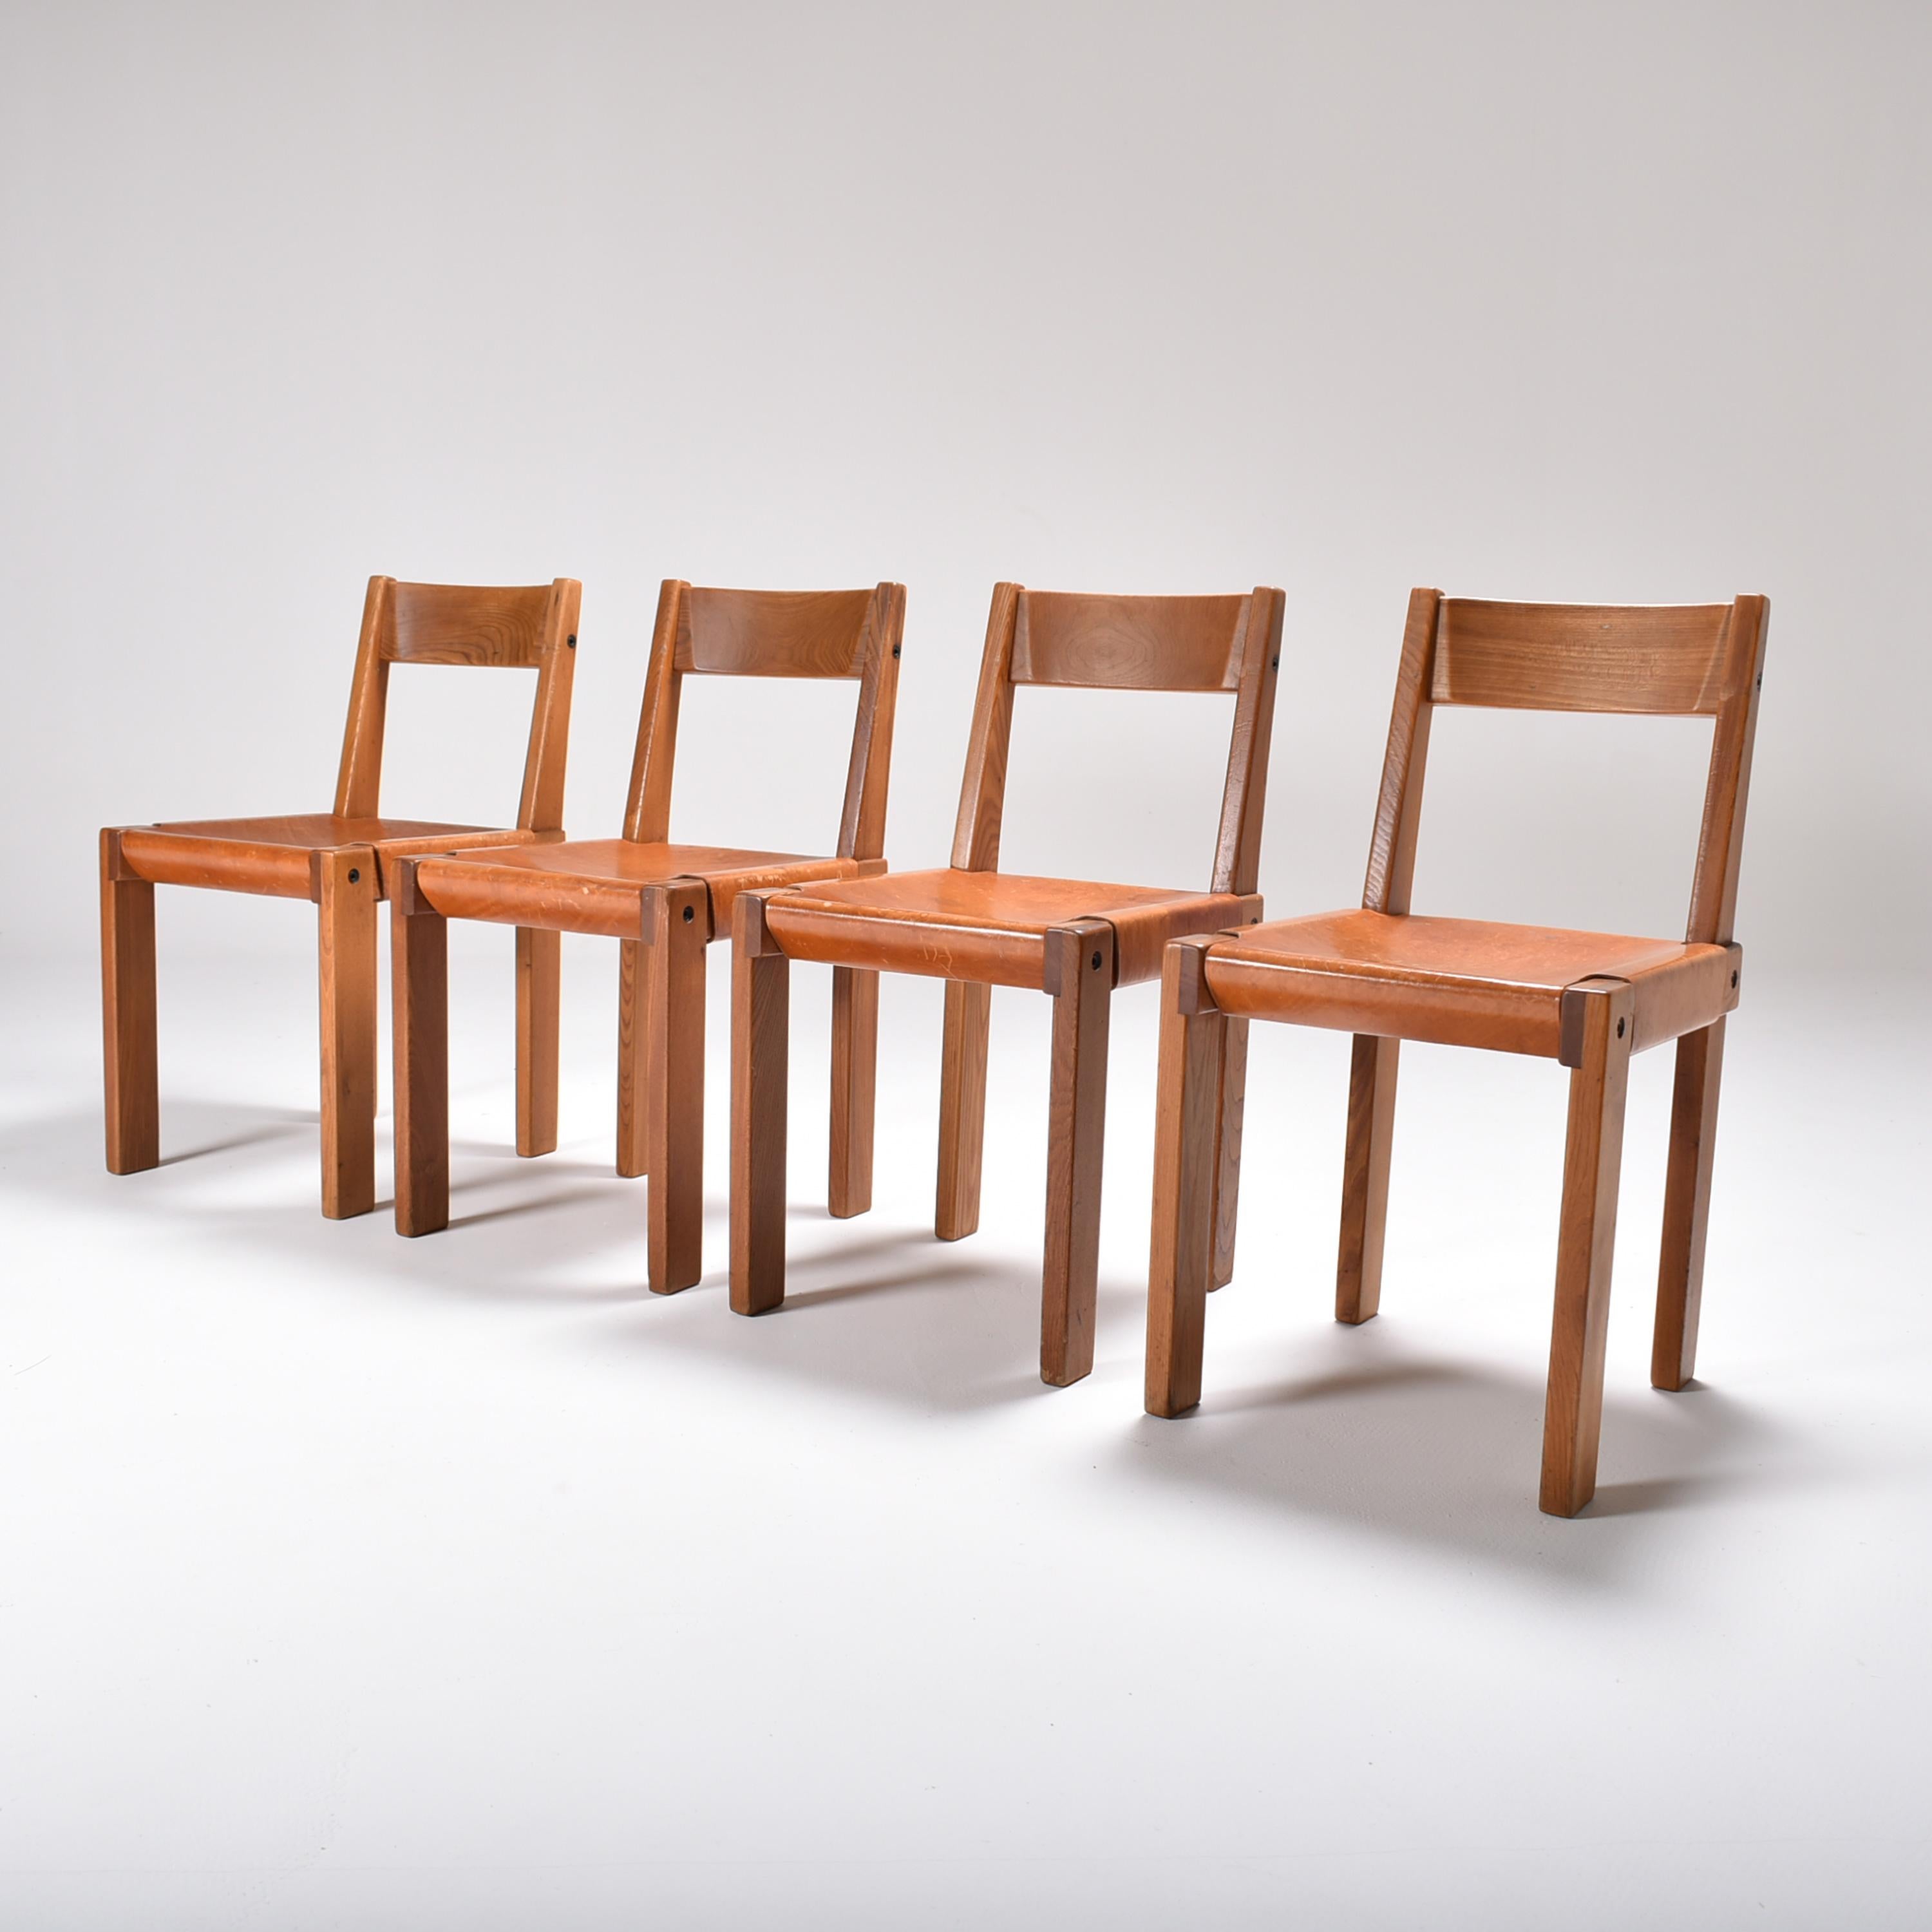 Set of four Mid-Century Modern Pierre Chapo dining room chairs, in solid elm and cognac leather.
Made of solid elm, Chapo's favorite wood specie, with his typical attention to details and finish.
The cognac leather is thick with a nice patina,